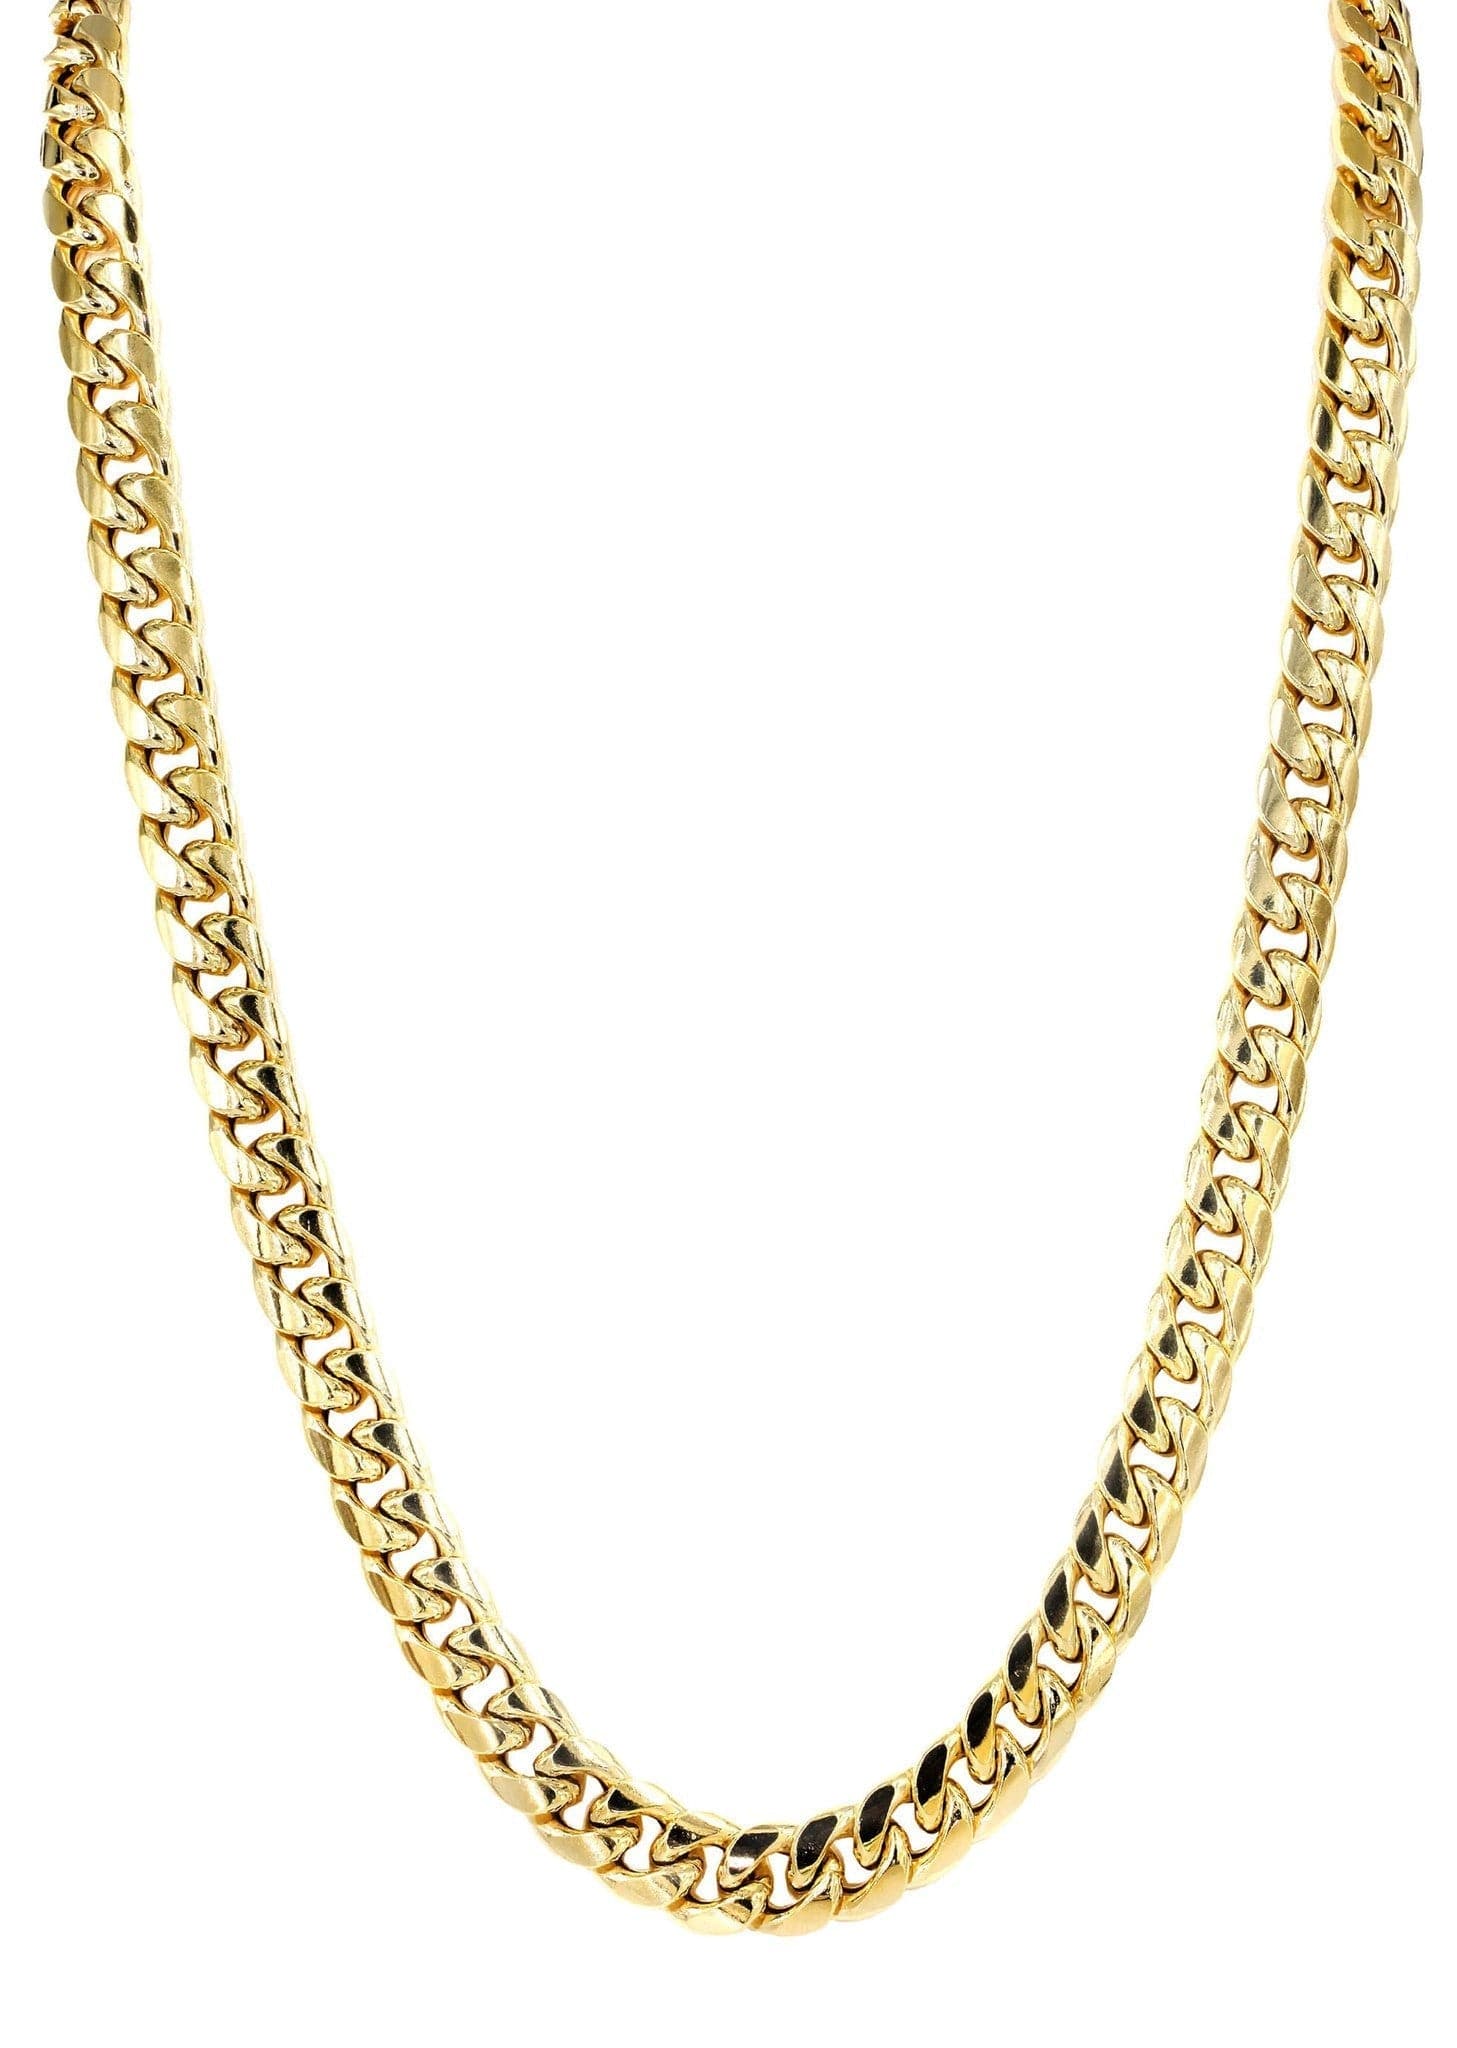 Gold Chain - Mens Hollow Miami Cuban Link Chain 10K Gold MEN'S CHAINS FROST NYC 